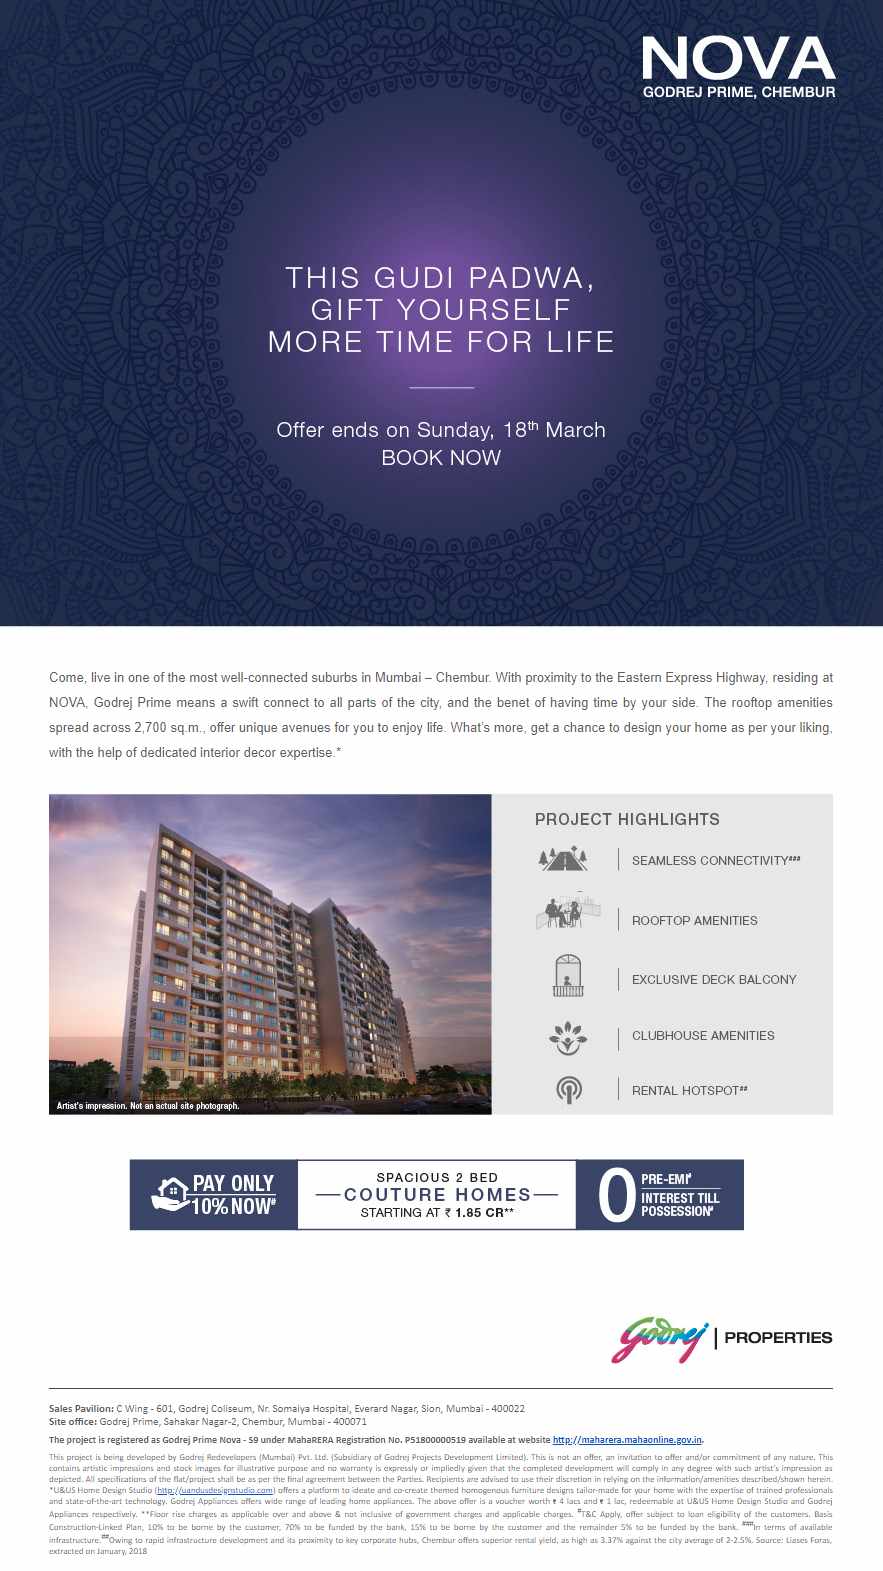 Pay only 10% now to book your home at Godrej Prime Nova in Mumbai